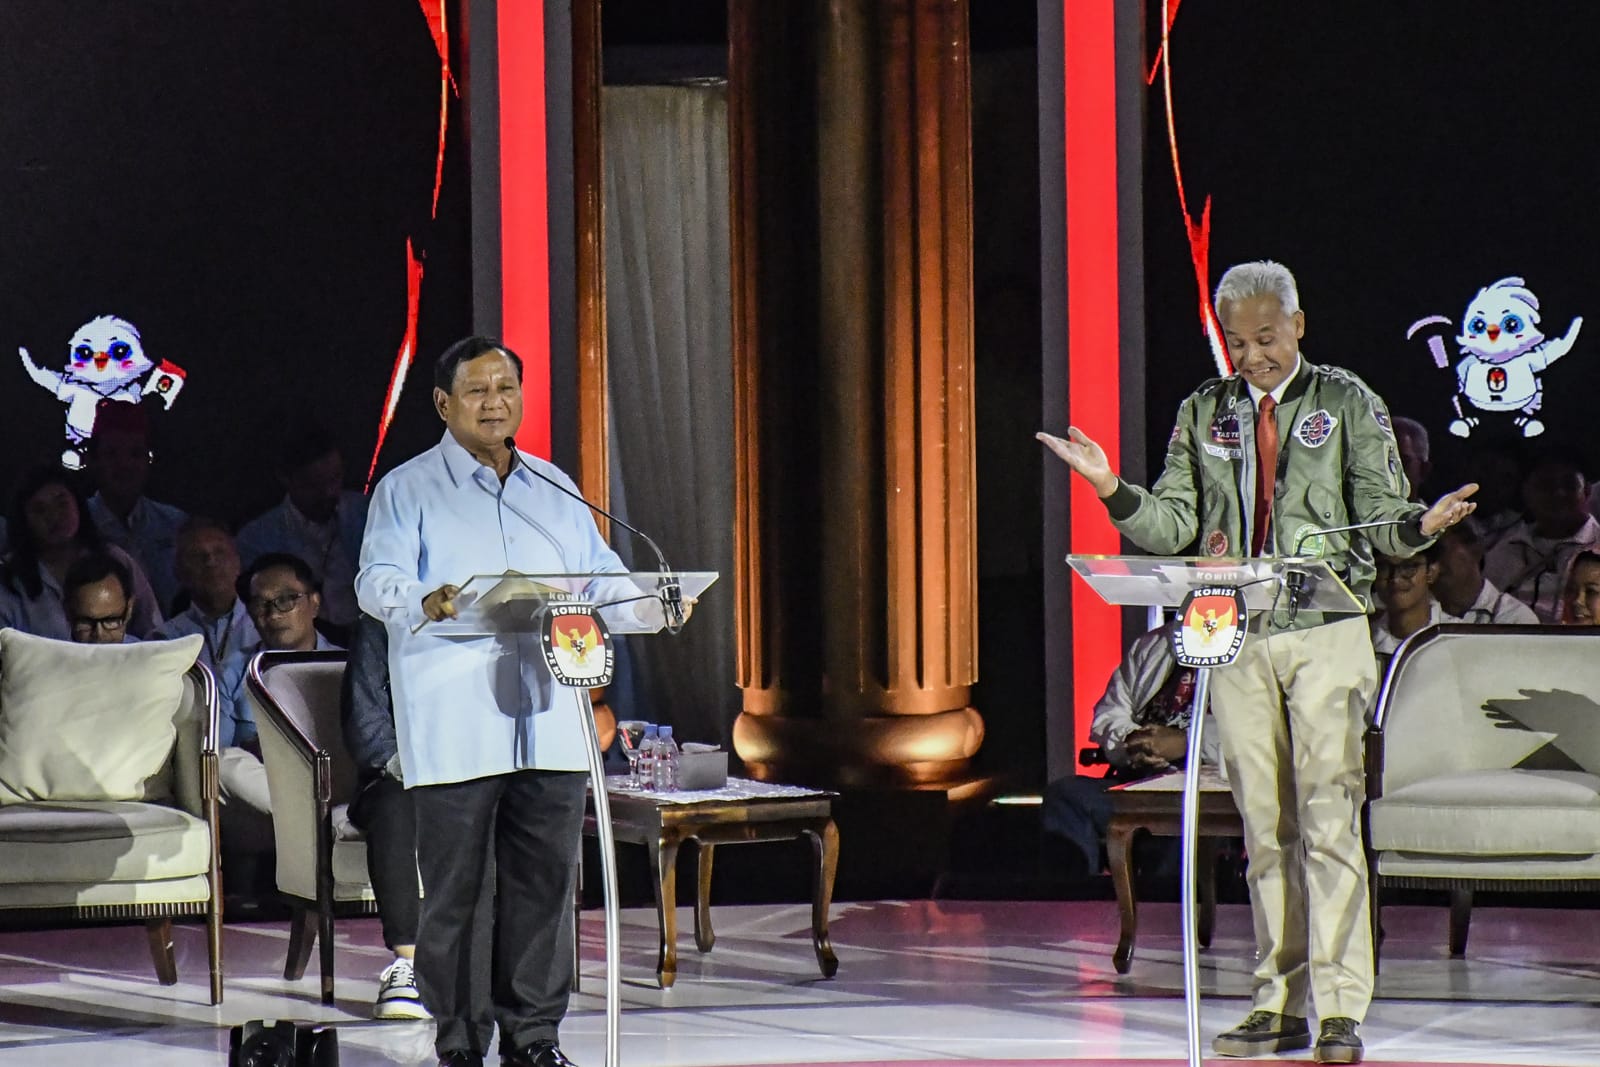 Prabowo Subianto, left, struggles in the third presidential candidate debate as rival Ganjar Pranowo challenges his record (Darryl Ramadhan/NurPhoto via Getty Images)